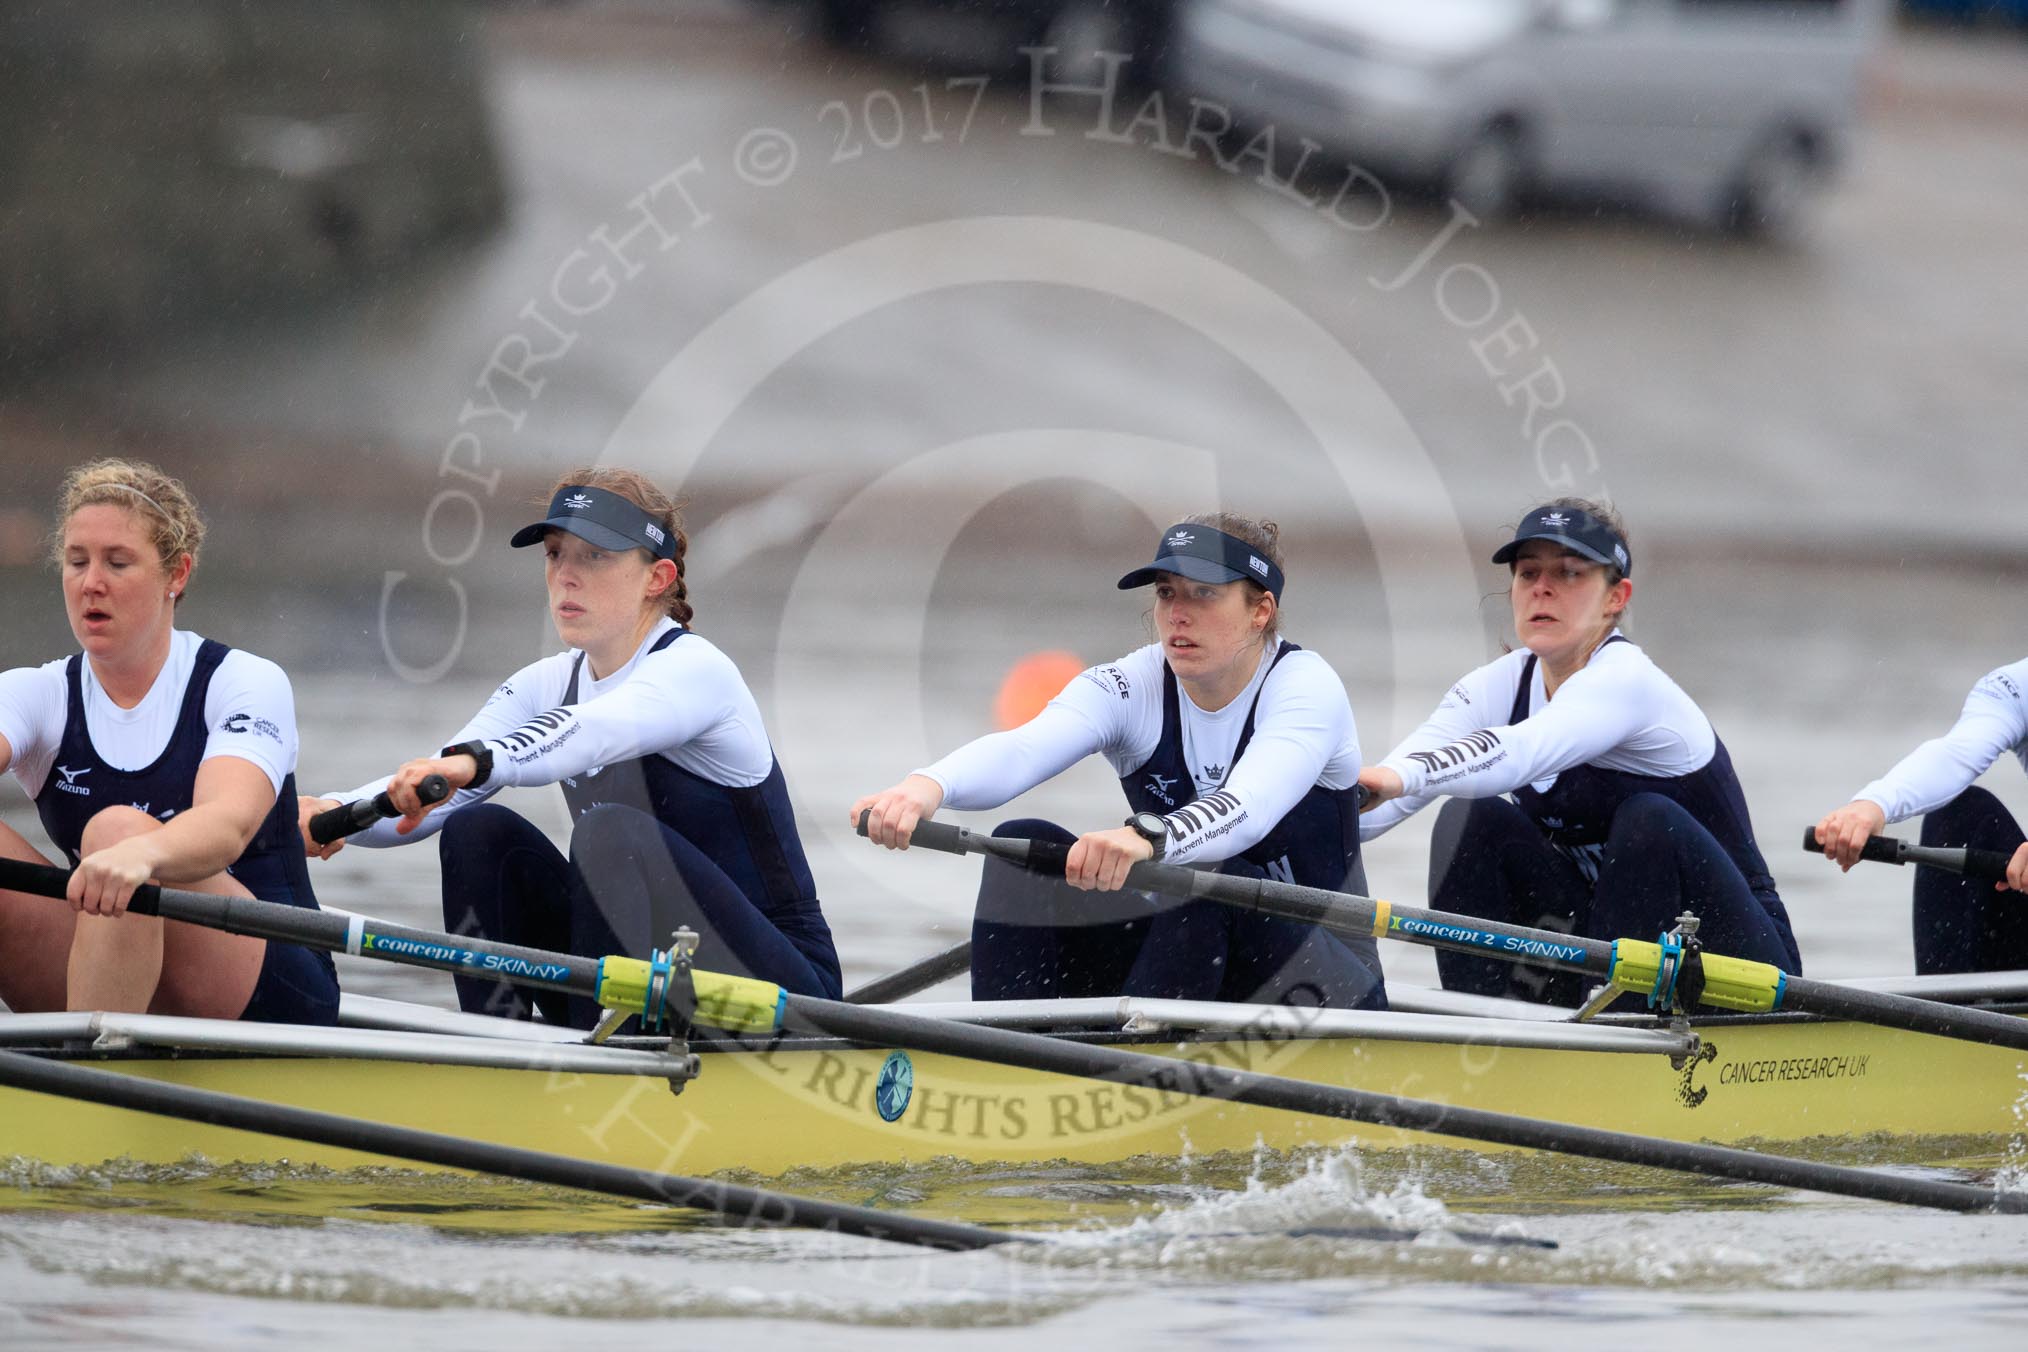 The Boat Race season 2018 - Women's Boat Race Trial Eights (OUWBC, Oxford): "Coursing River" - 5 Morgan McGovern, 4 Anna Murgatroyd, 3 Stefanie Zekoll, 2 Rachel Anderson, bow Sarah Payne-Riches.
River Thames between Putney Bridge and Mortlake,
London SW15,

United Kingdom,
on 21 January 2018 at 14:28, image #59